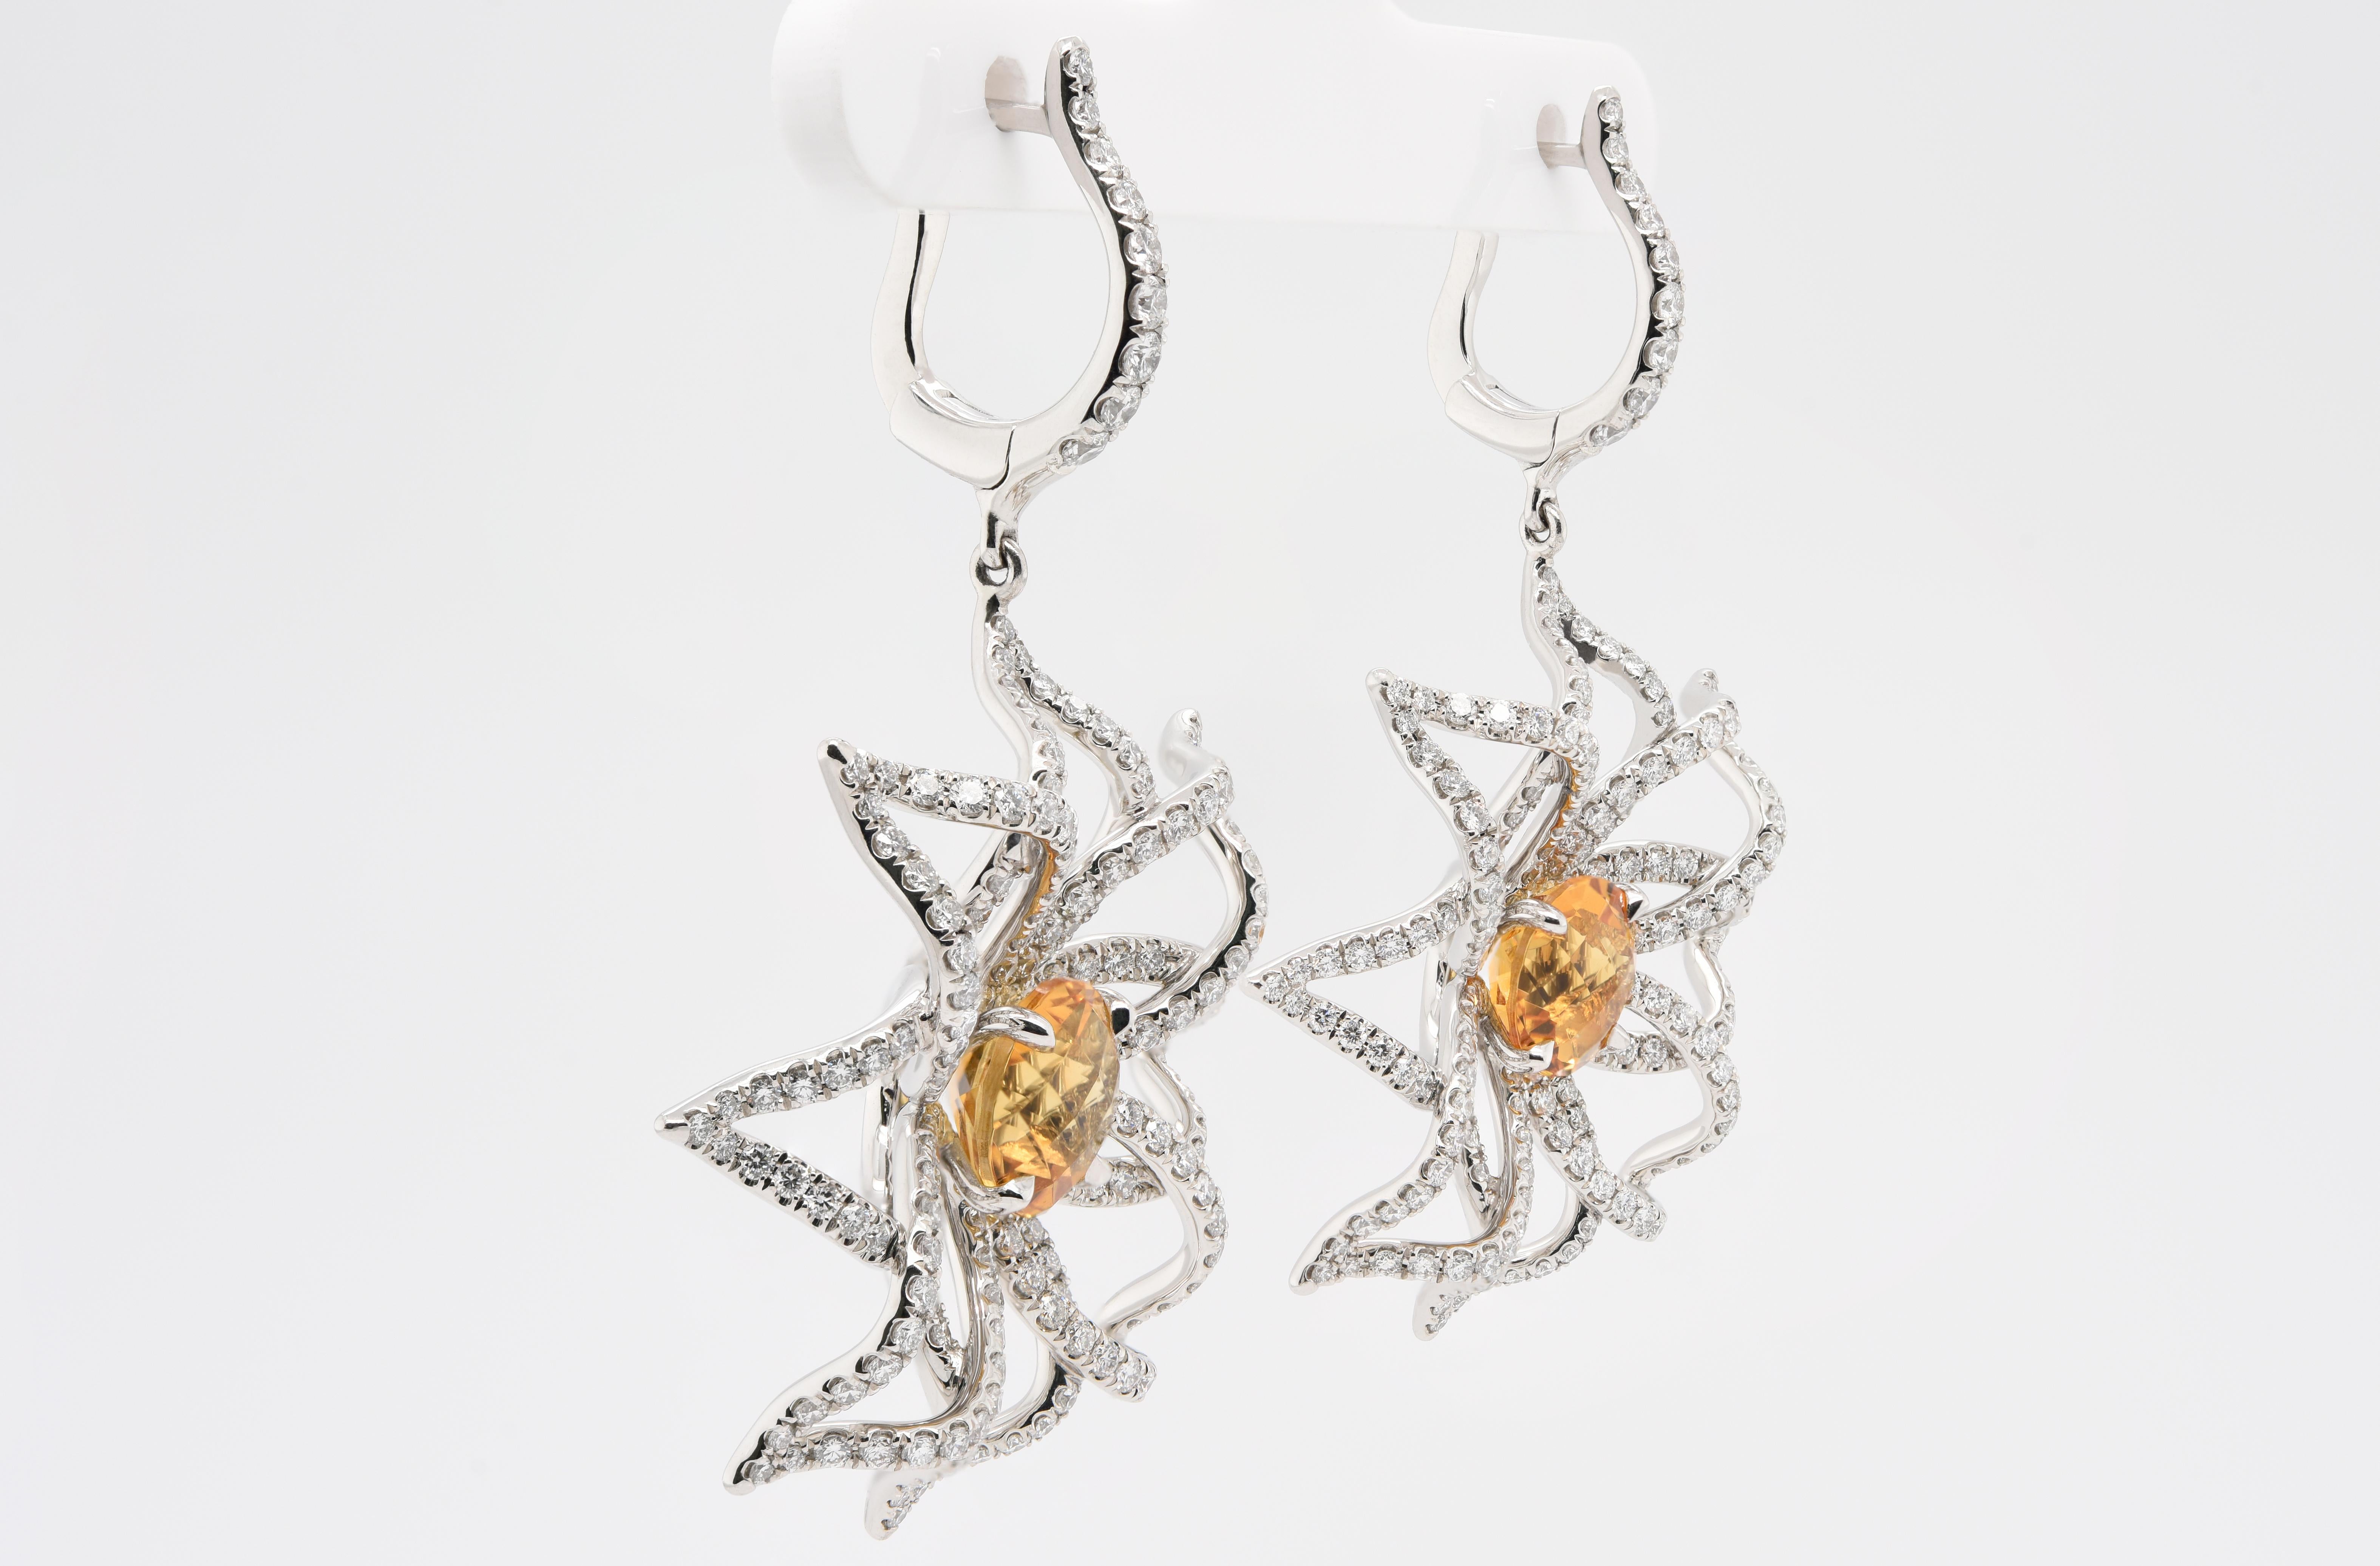 These amazing Citrine and Diamond Petal Earrings look like flower petals with the Citrine as the flower. There are 3.65 carats in Citrine and 418 diamonds for a total gemstone weight of 6.15 carats all designed in Platinum with lever-backs for